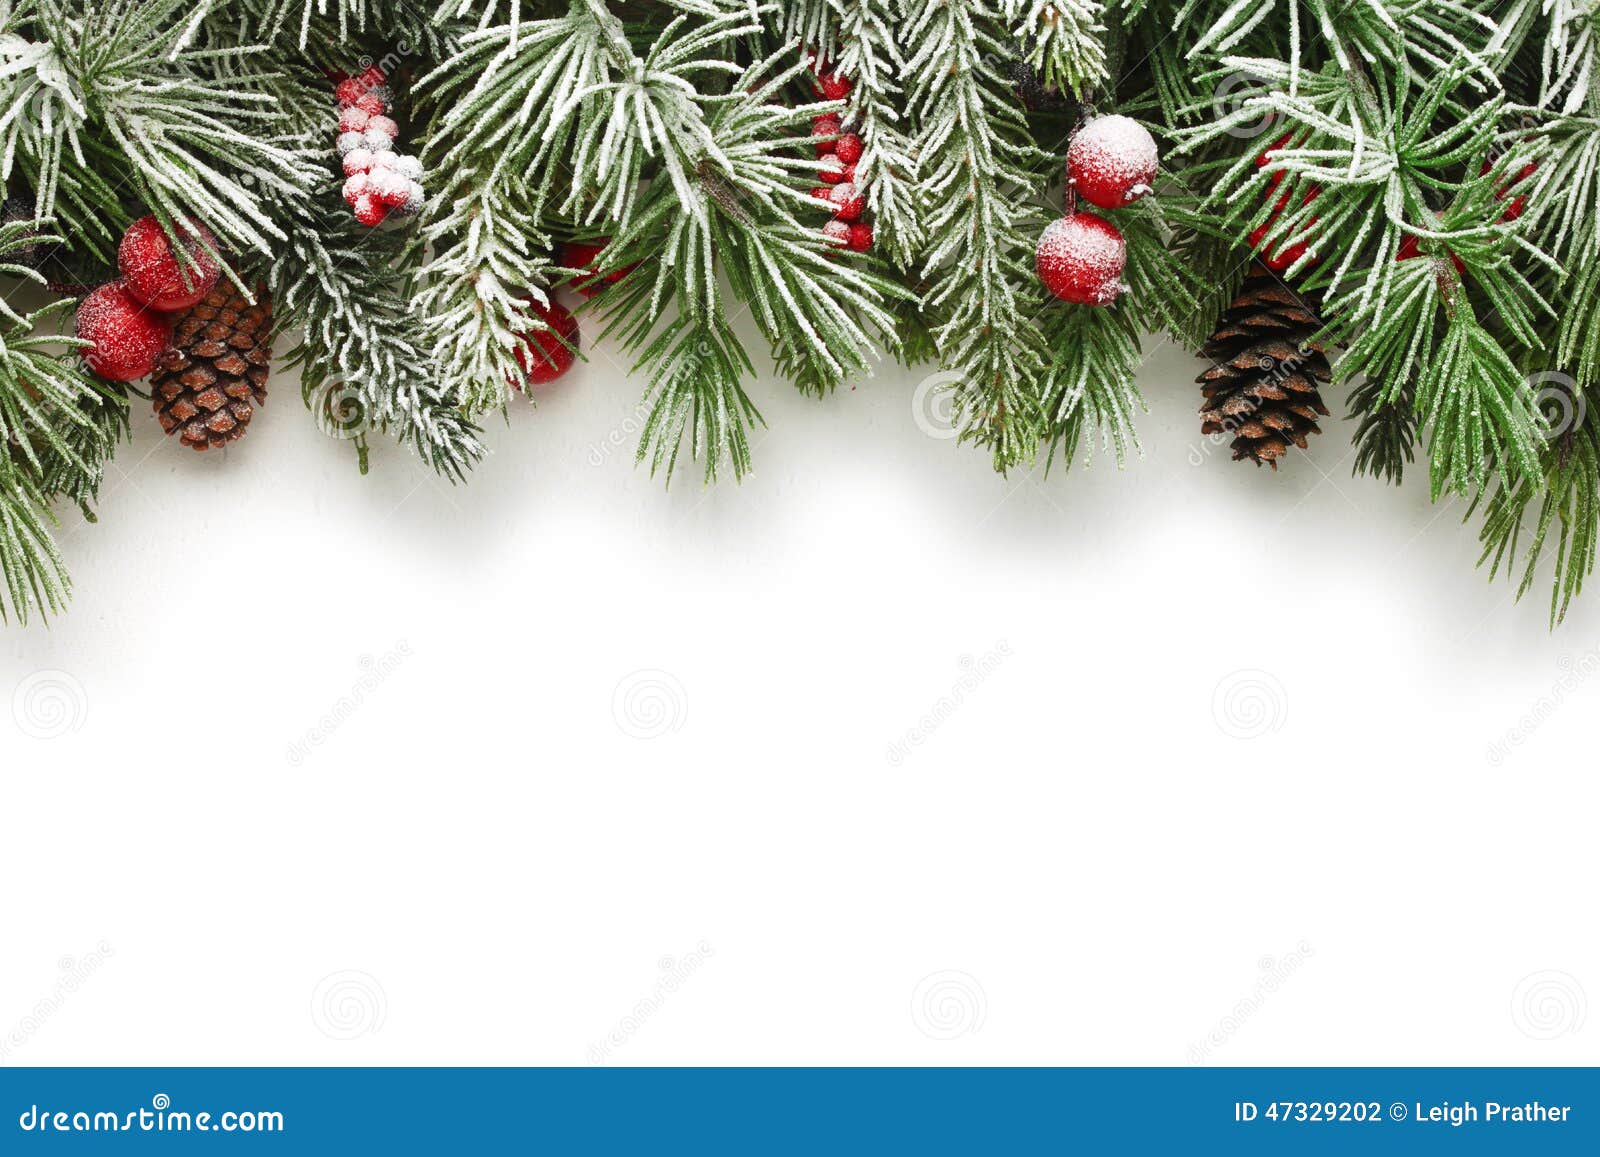 christmas tree branches background